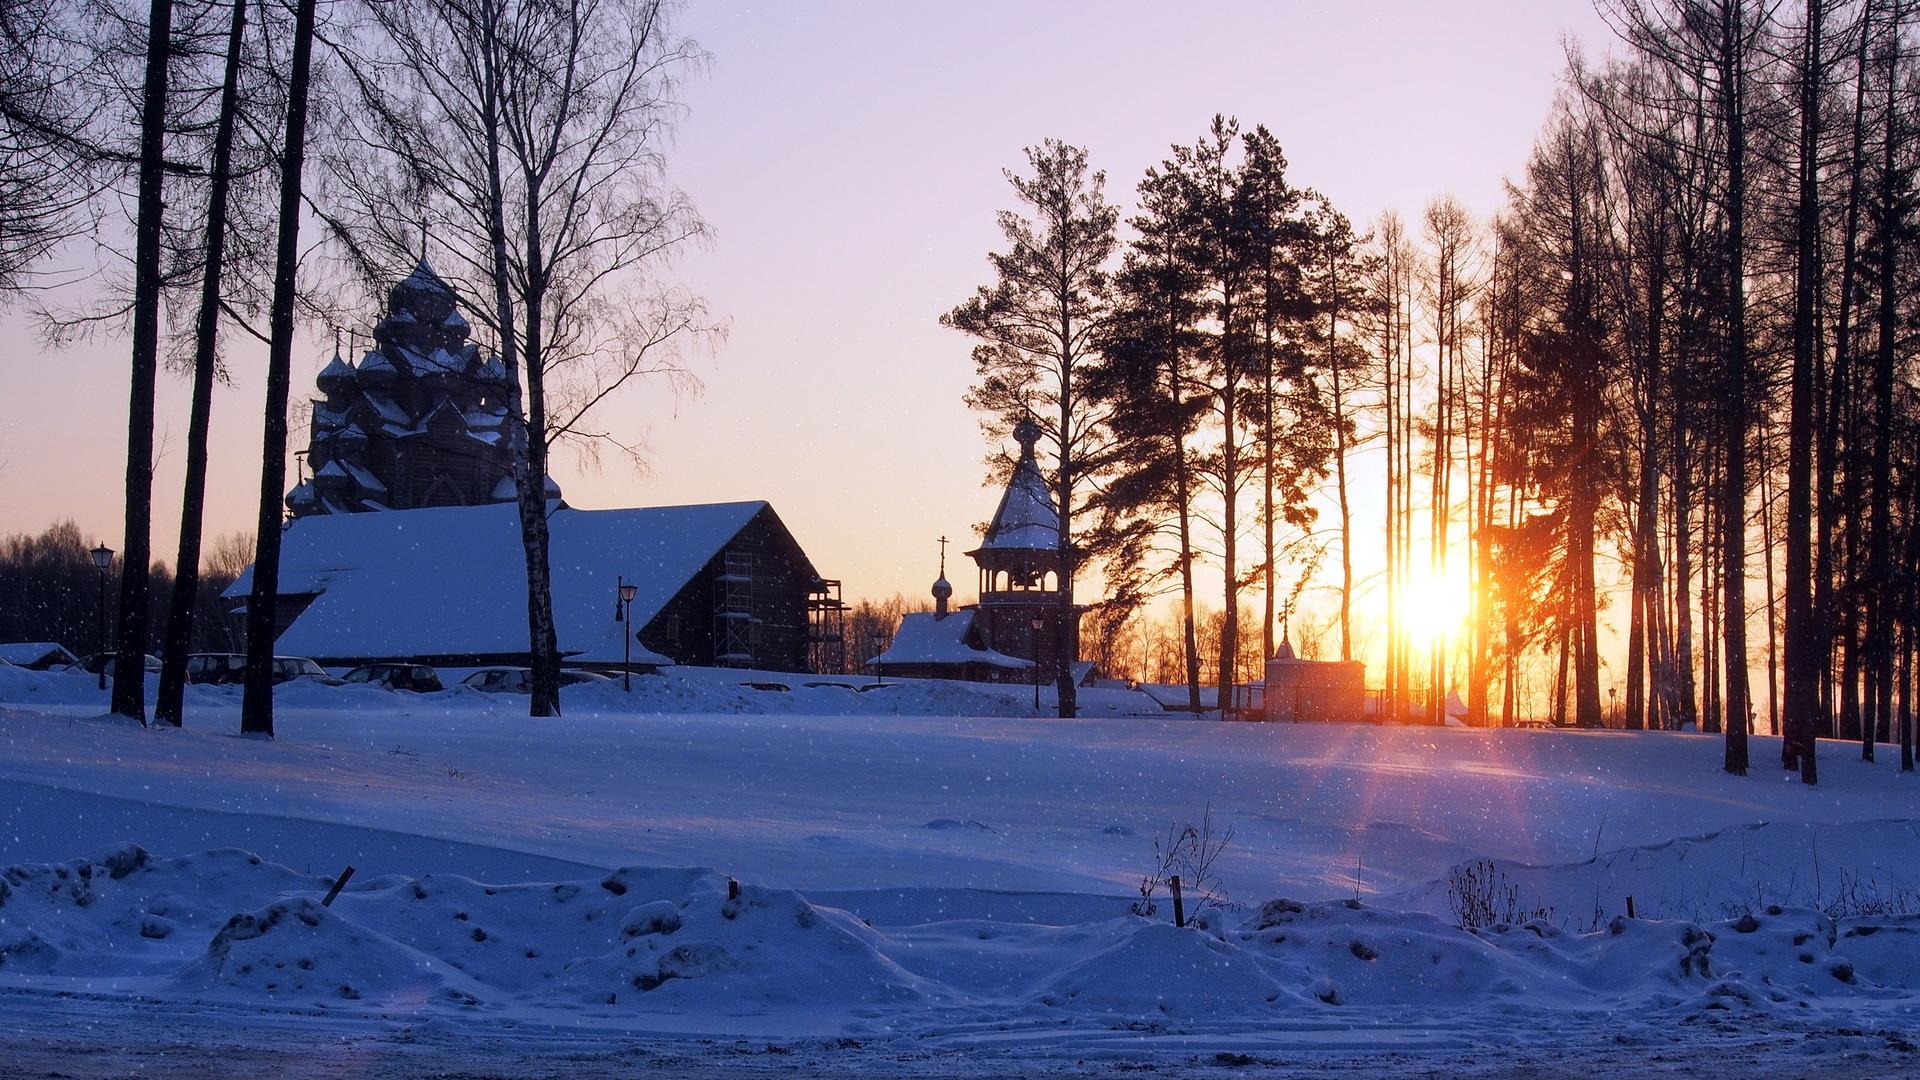 Sunrise On An Orthodox Church In Winter High Quality And